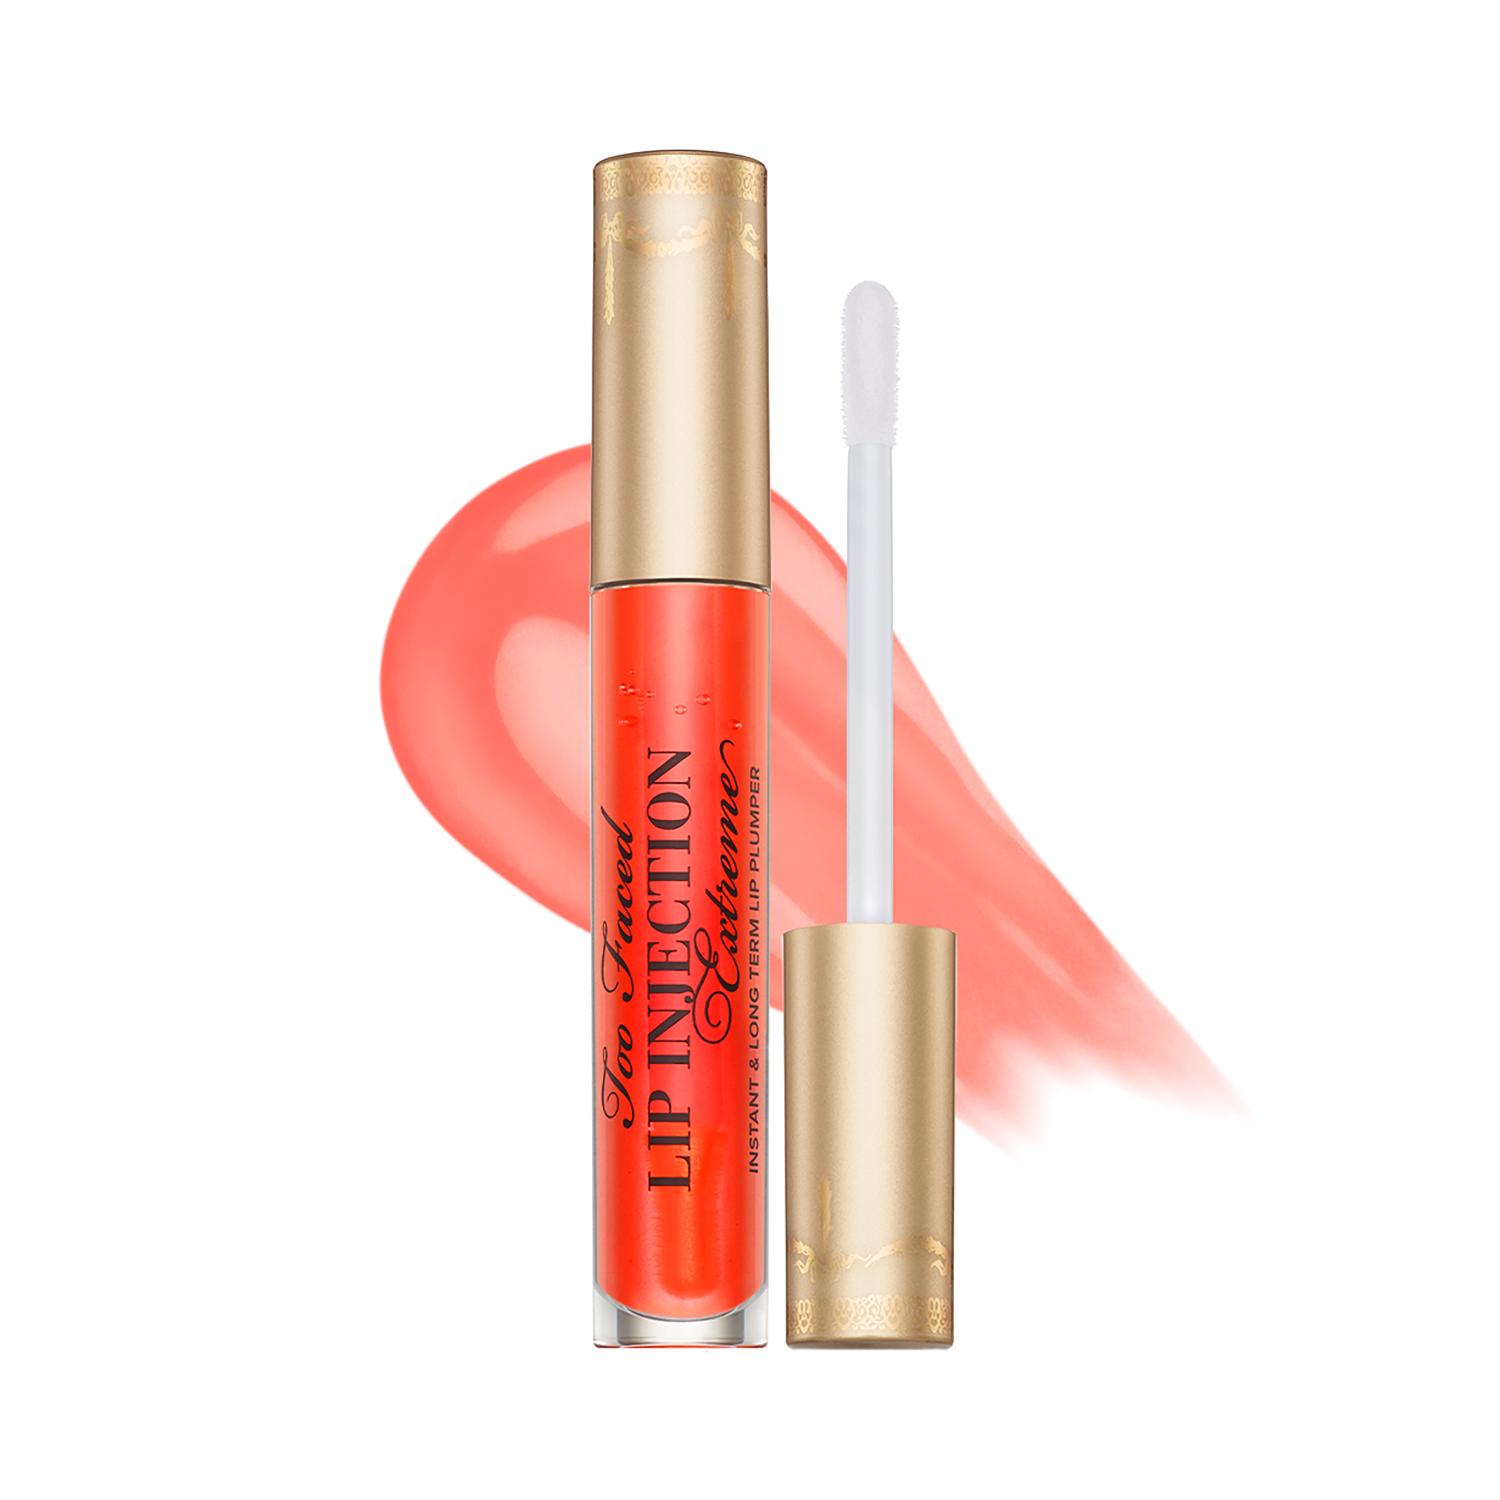 Too Faced | Too Faced Lip Injection Plumping Lip Gloss -  Tangerine Dream (4g)